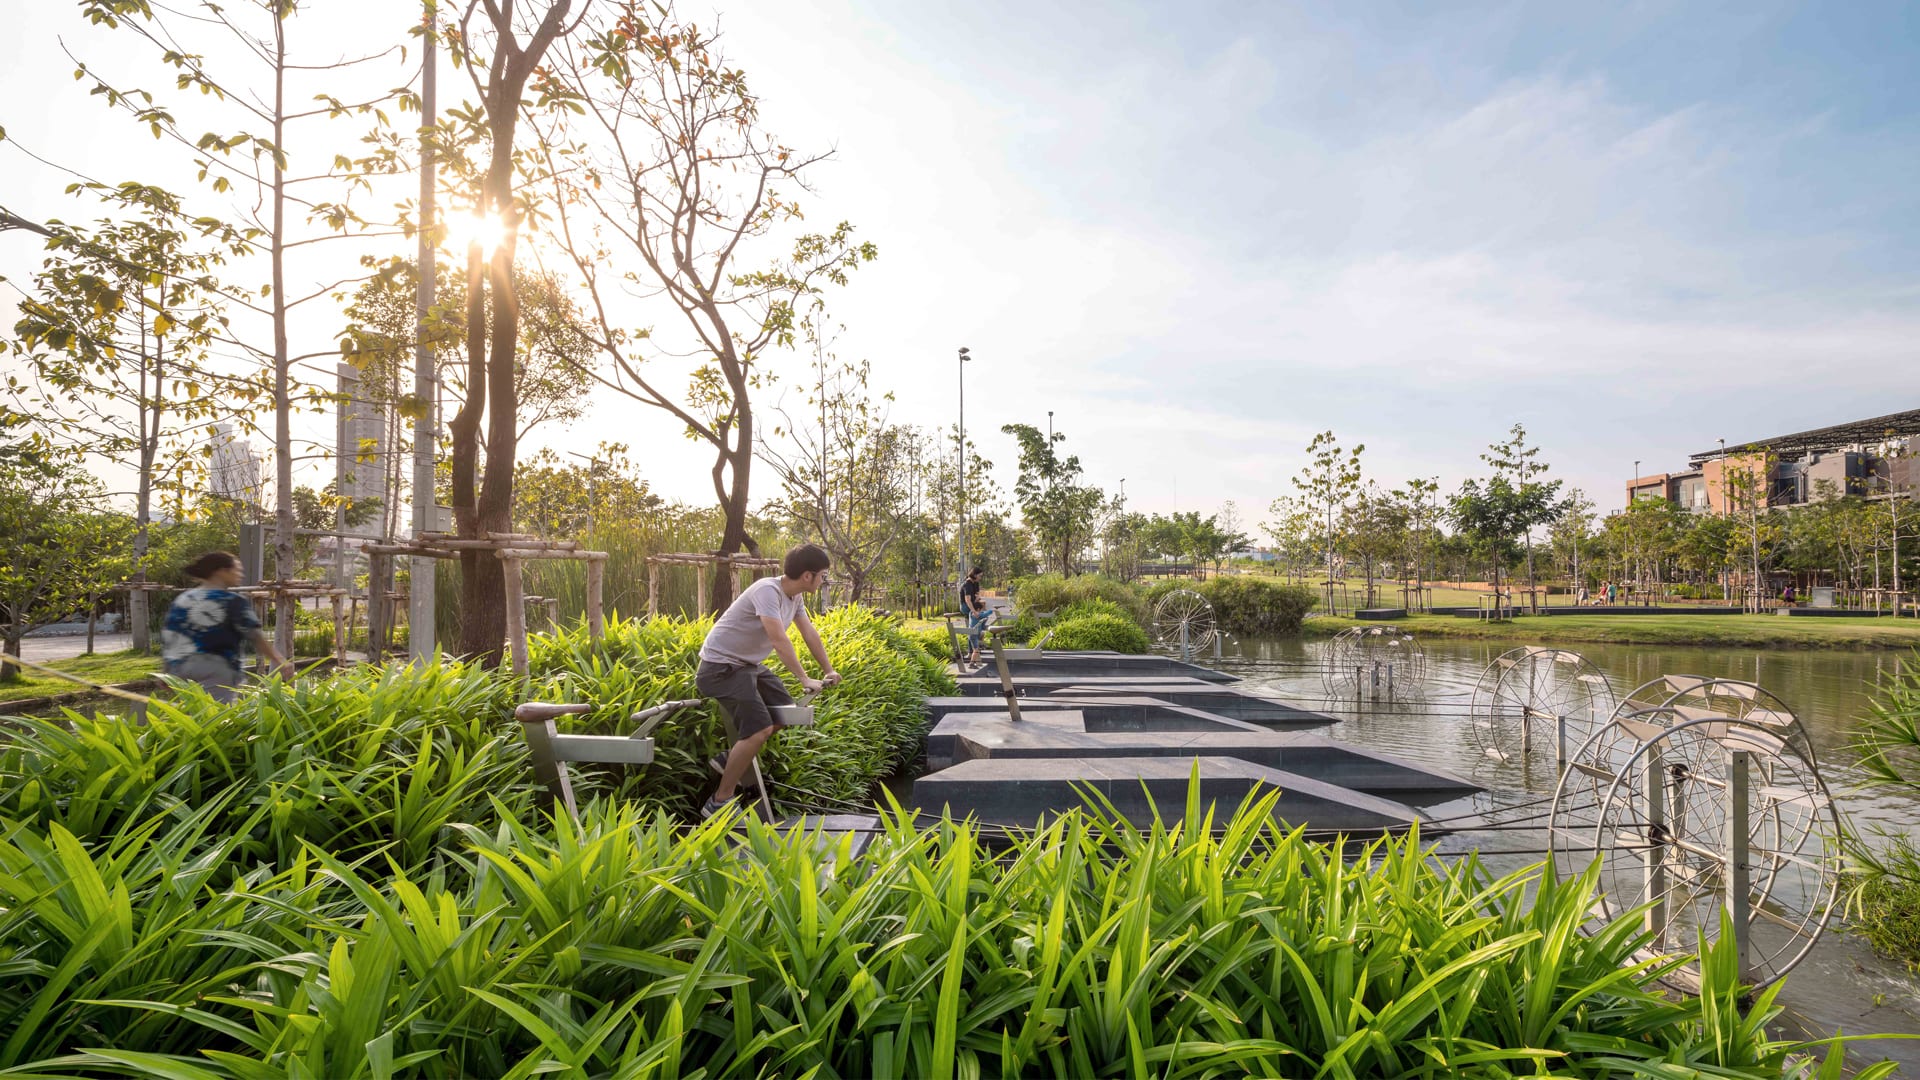 This new park is designed for a future of flooded cities